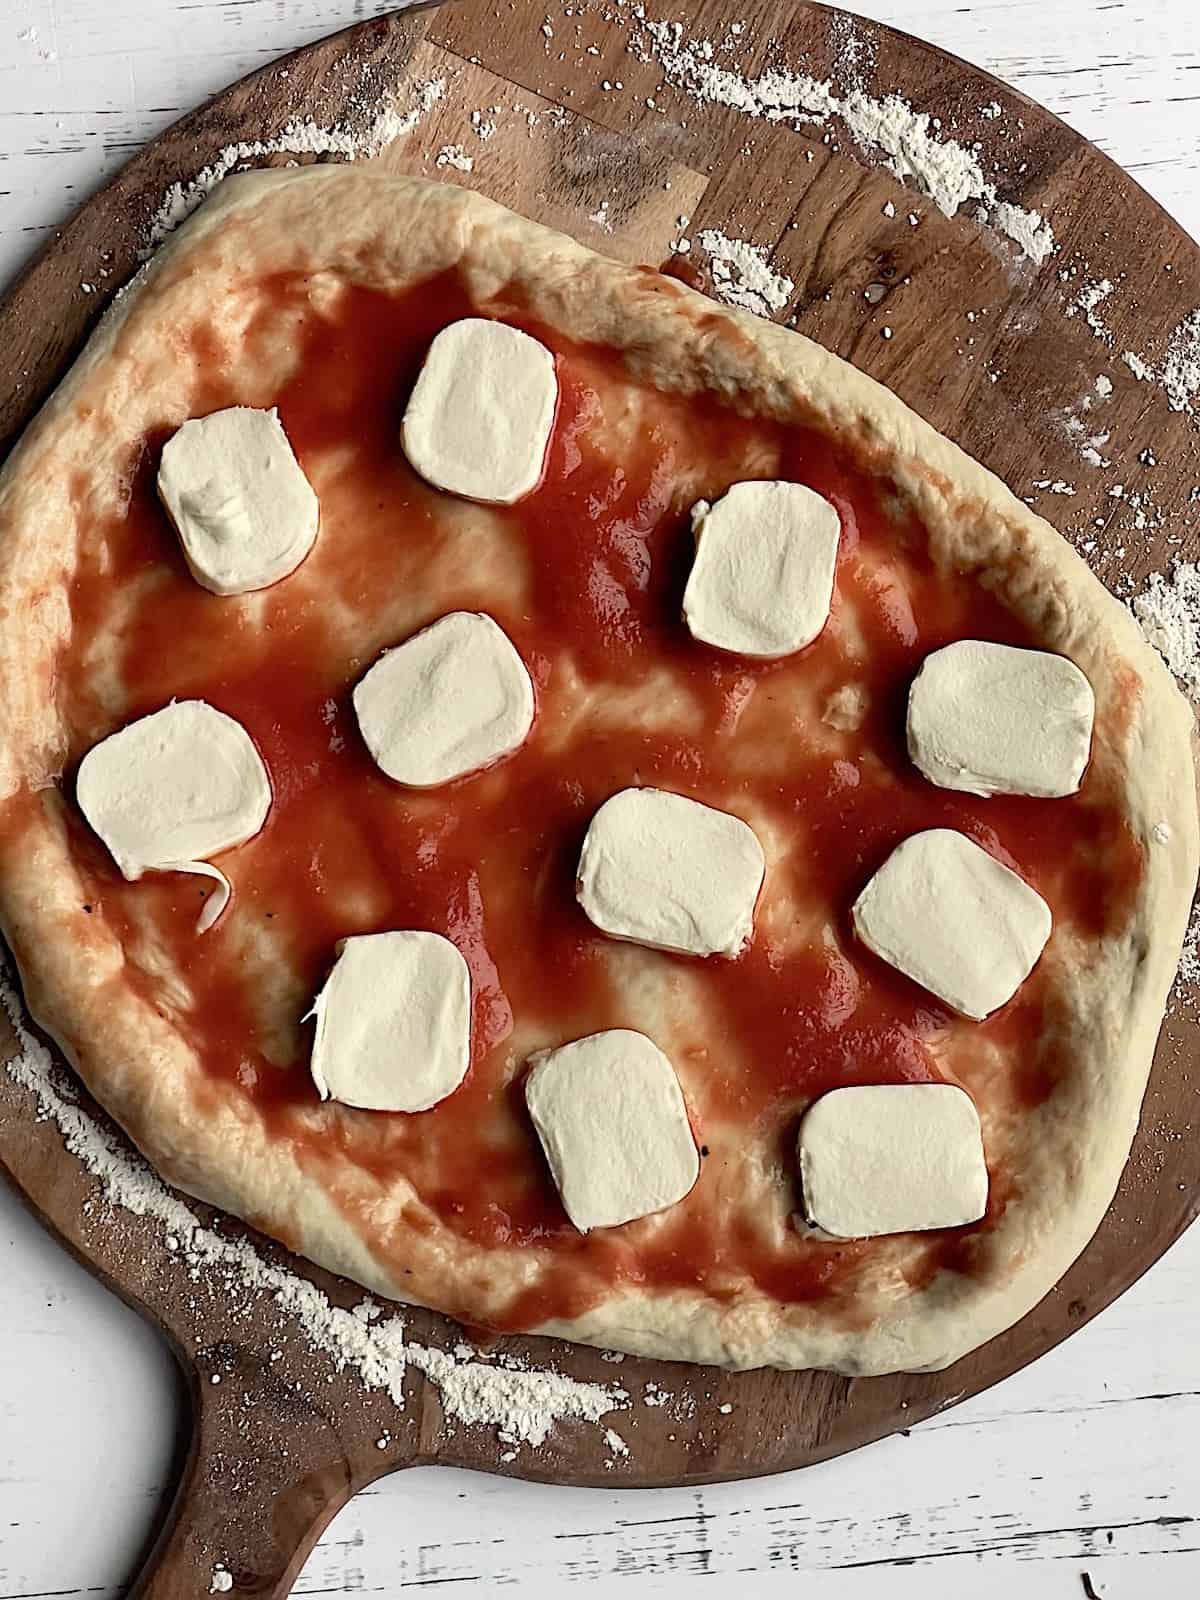 uncooked neapolitan pizza dough on a pizza peel, topped with sauce and mozzarella slices